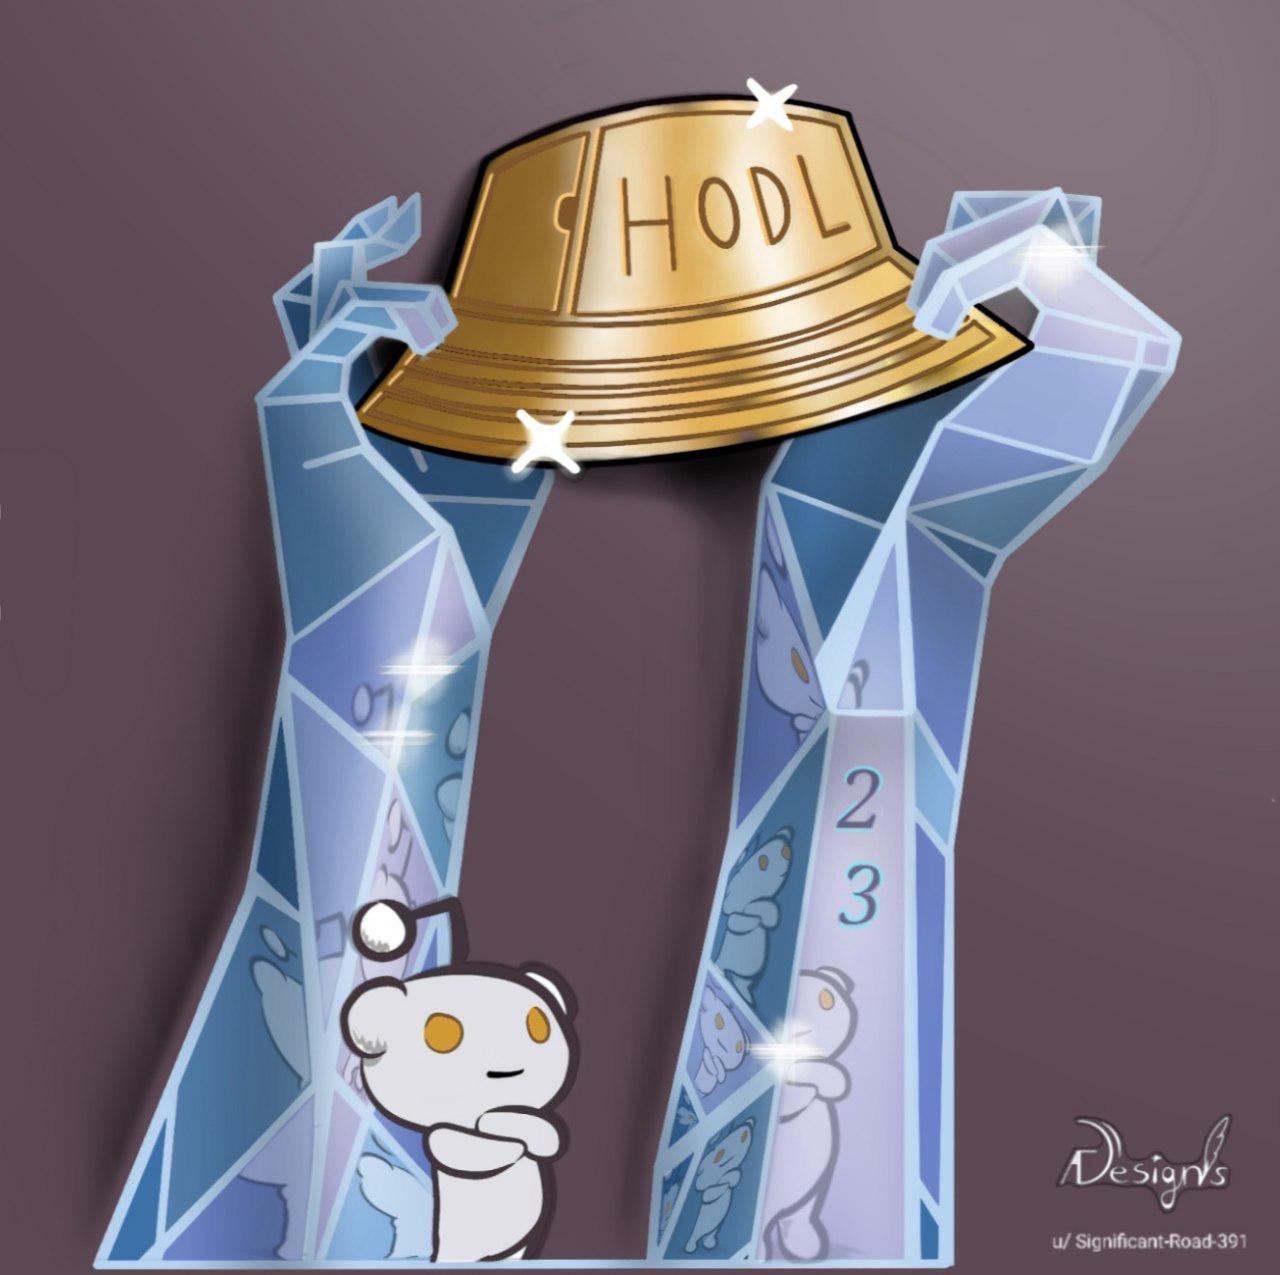 DIAMOND HAND HODLER – by u/Obvious-Ask-5747